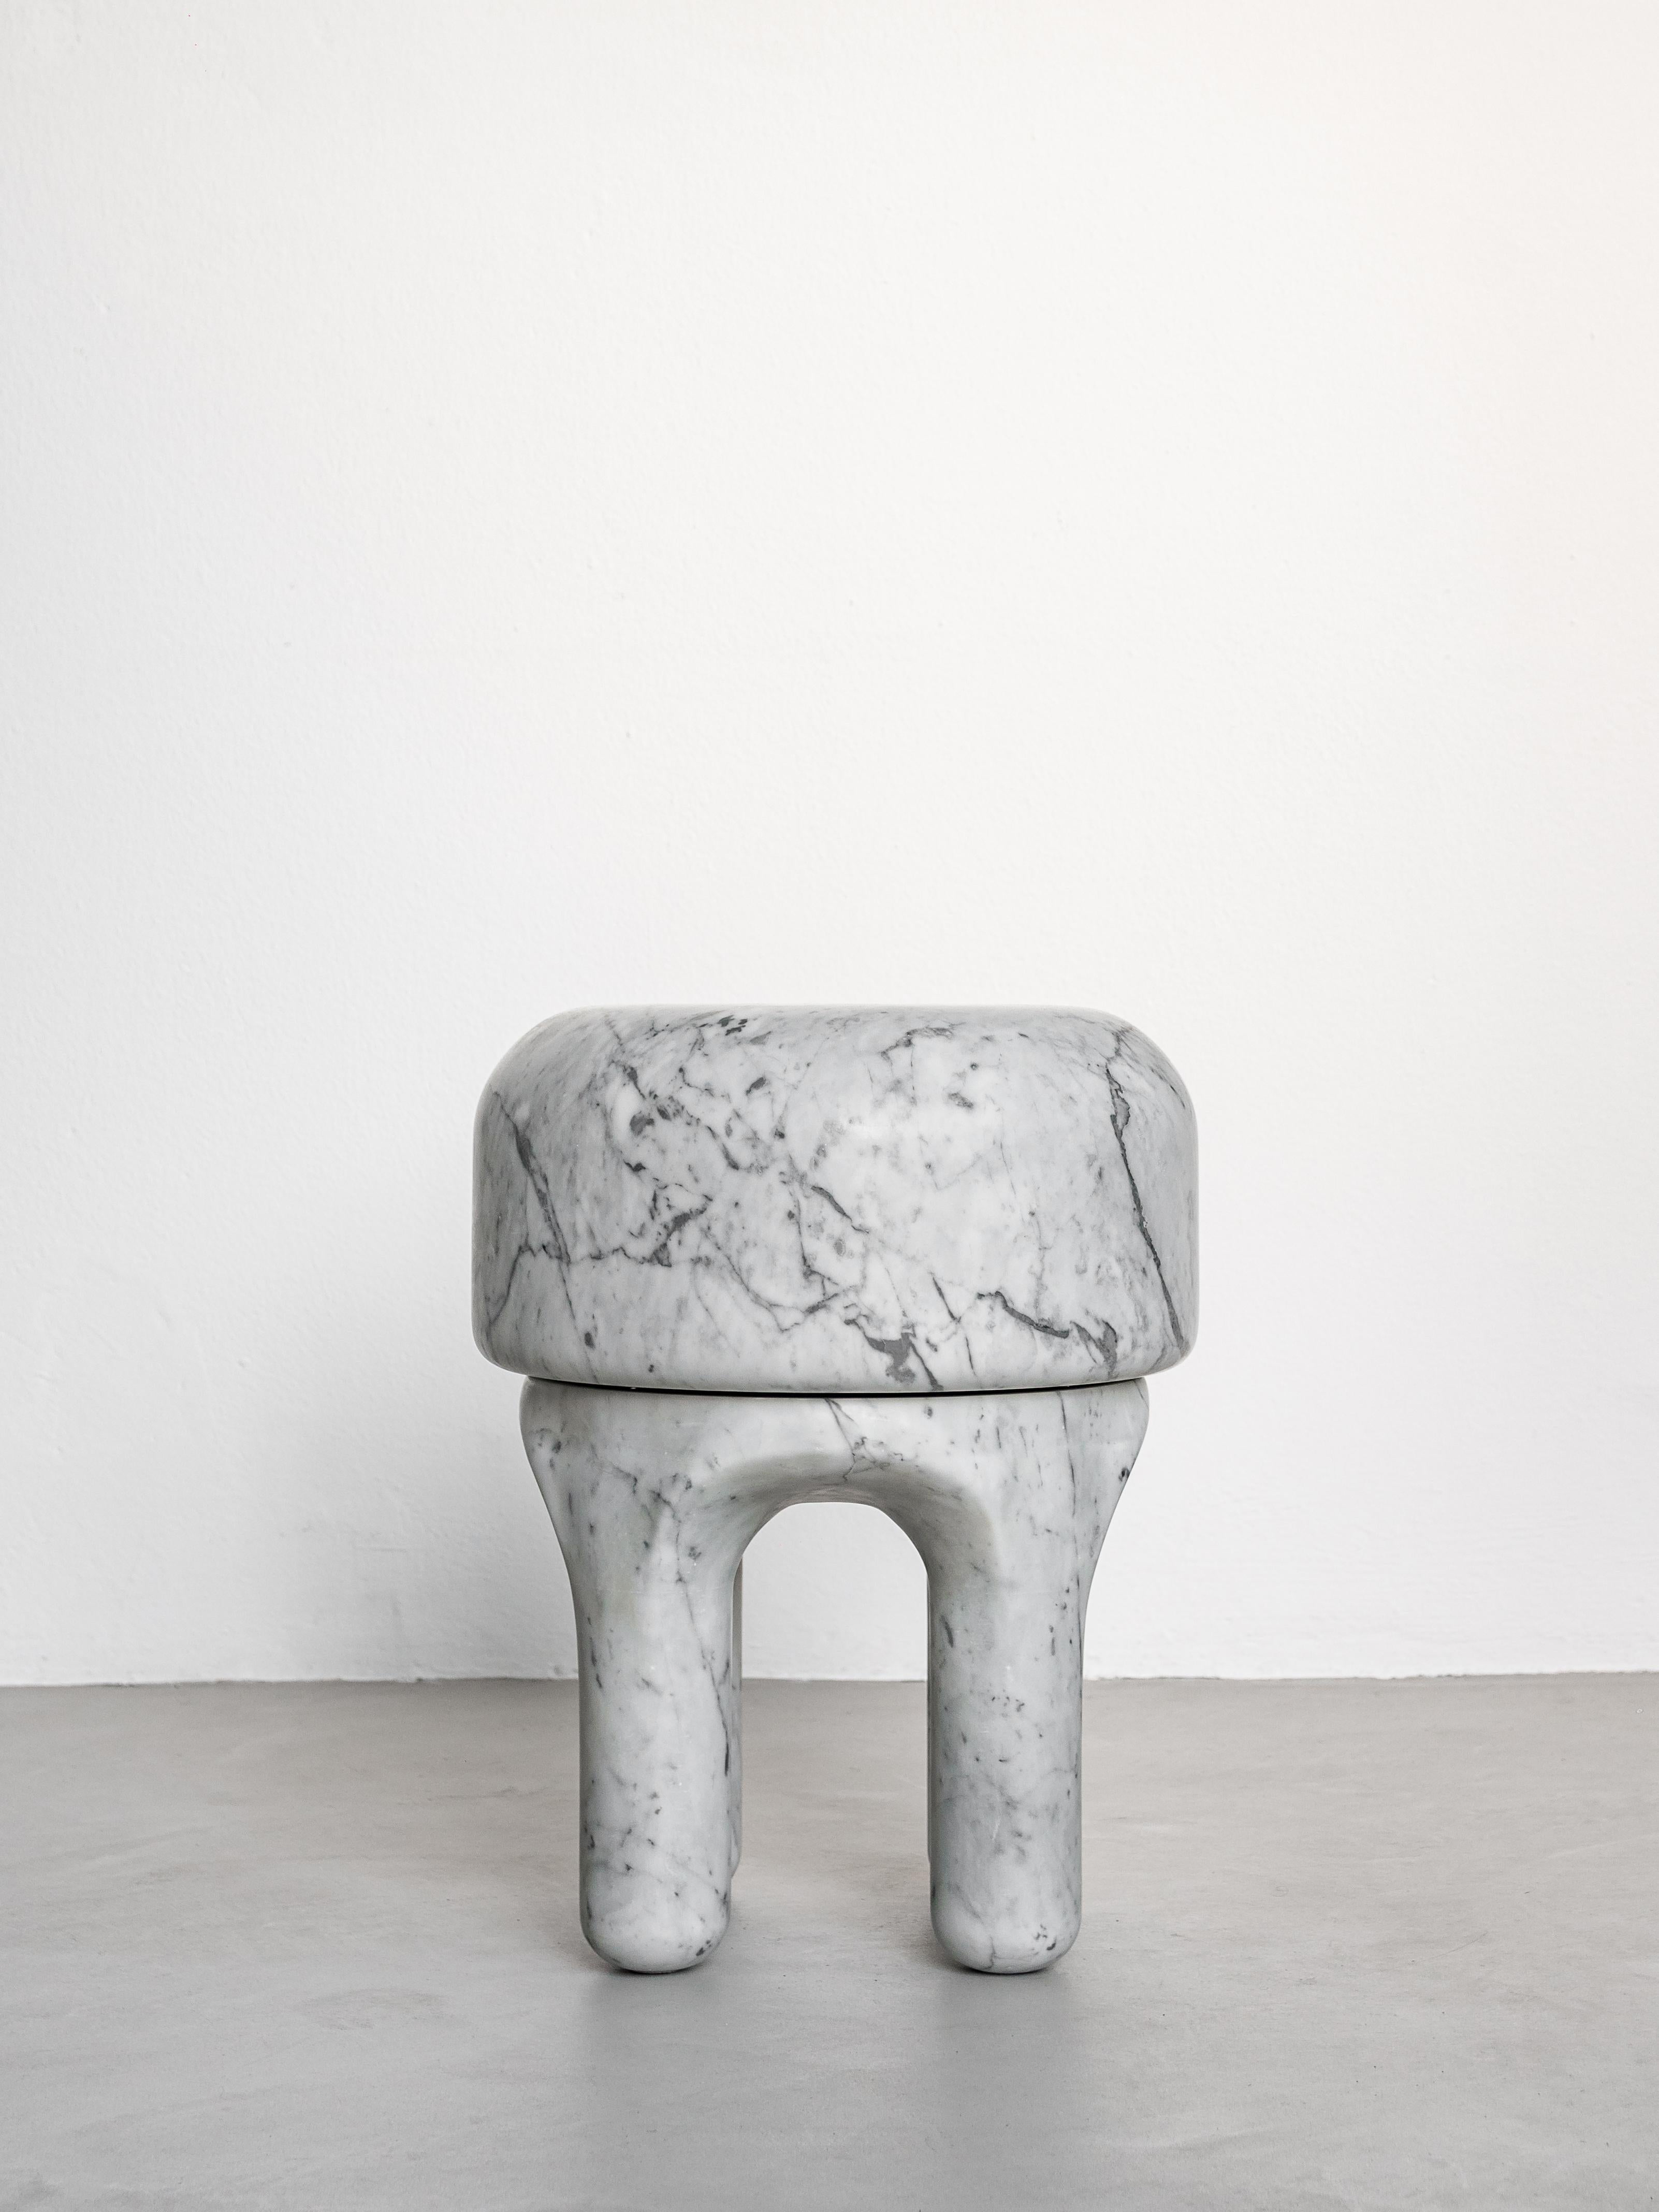 White Carrara Marble Stool - Collectible Italian Design - Marble Side Table

Past, present and future come together in this sculptural piece by Spinzi. Why you may ask? Because Medusa is shaped after a dream had by designer Tommaso Spinzi right